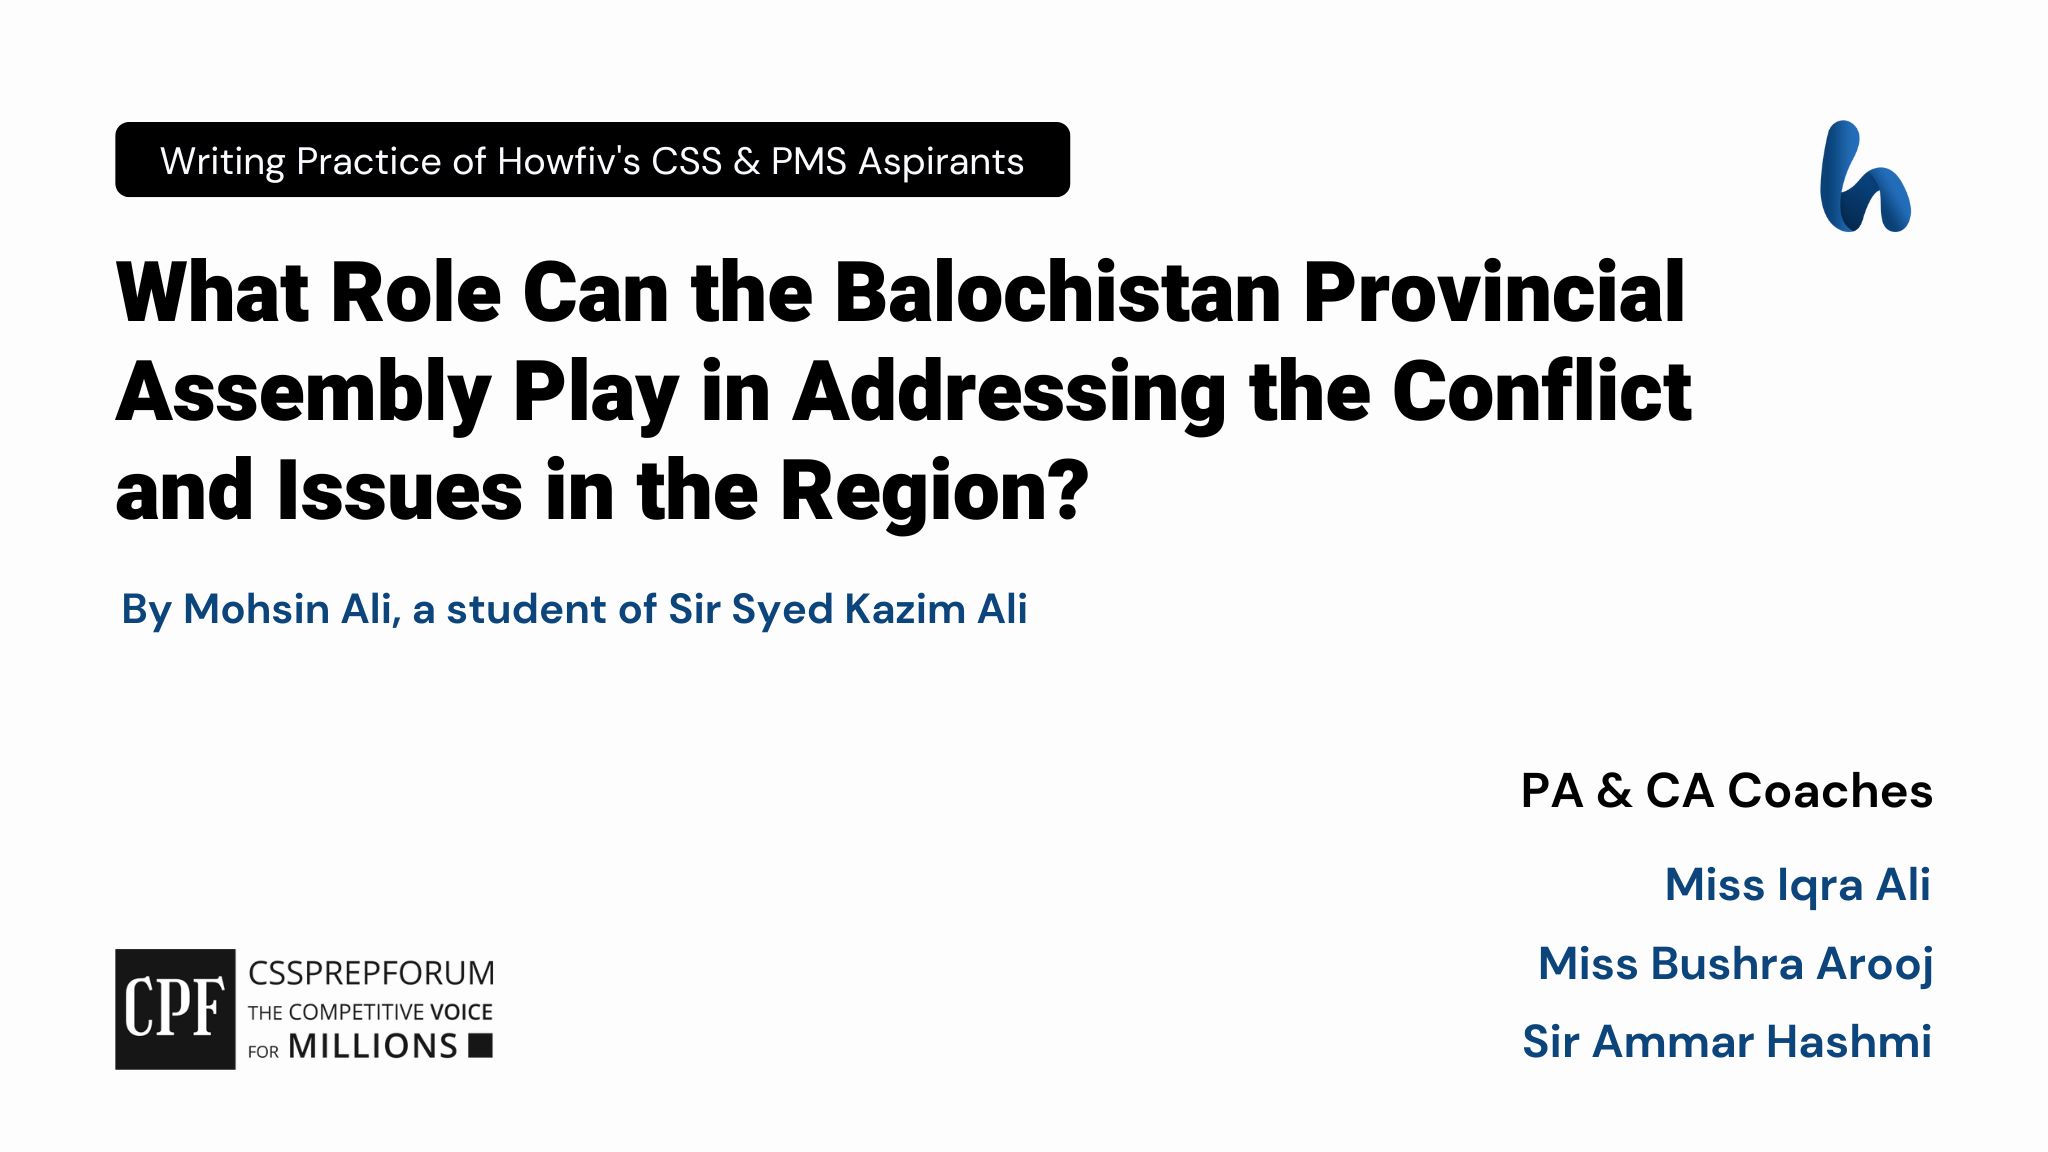 Role of Balochistan Provincial Assembly in Addressing Conflict | CSS Current Affairs article is written by Mohsin Ali, a student of Sir Syed Kazim Ali...